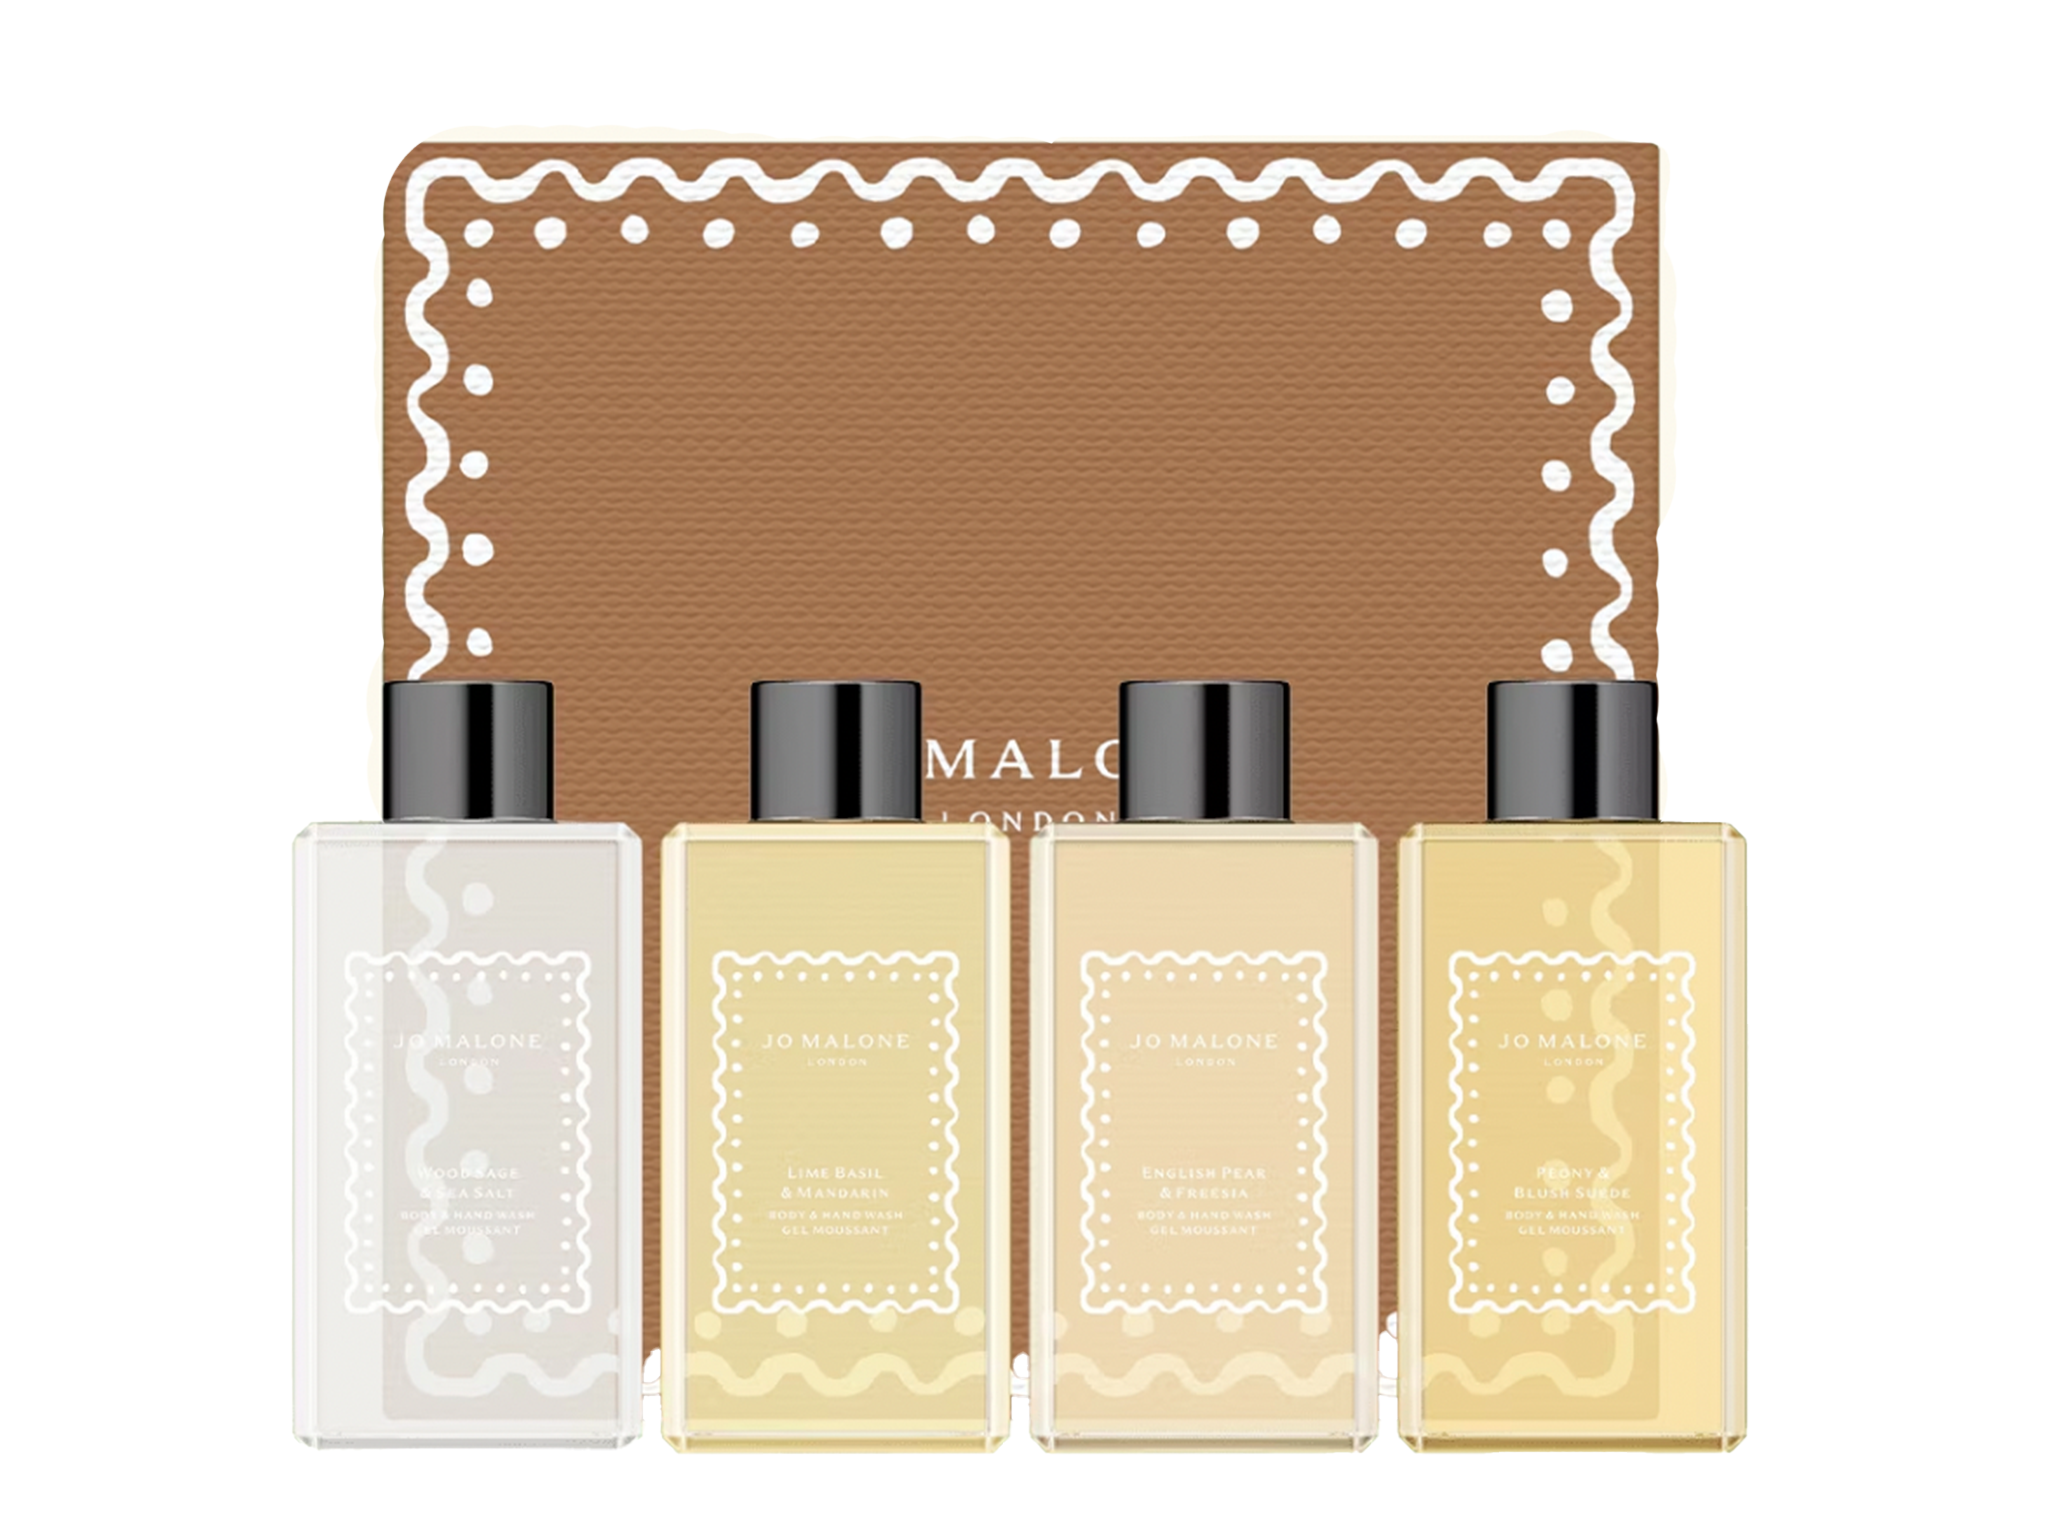 Jo Malone London body and hand wash collection